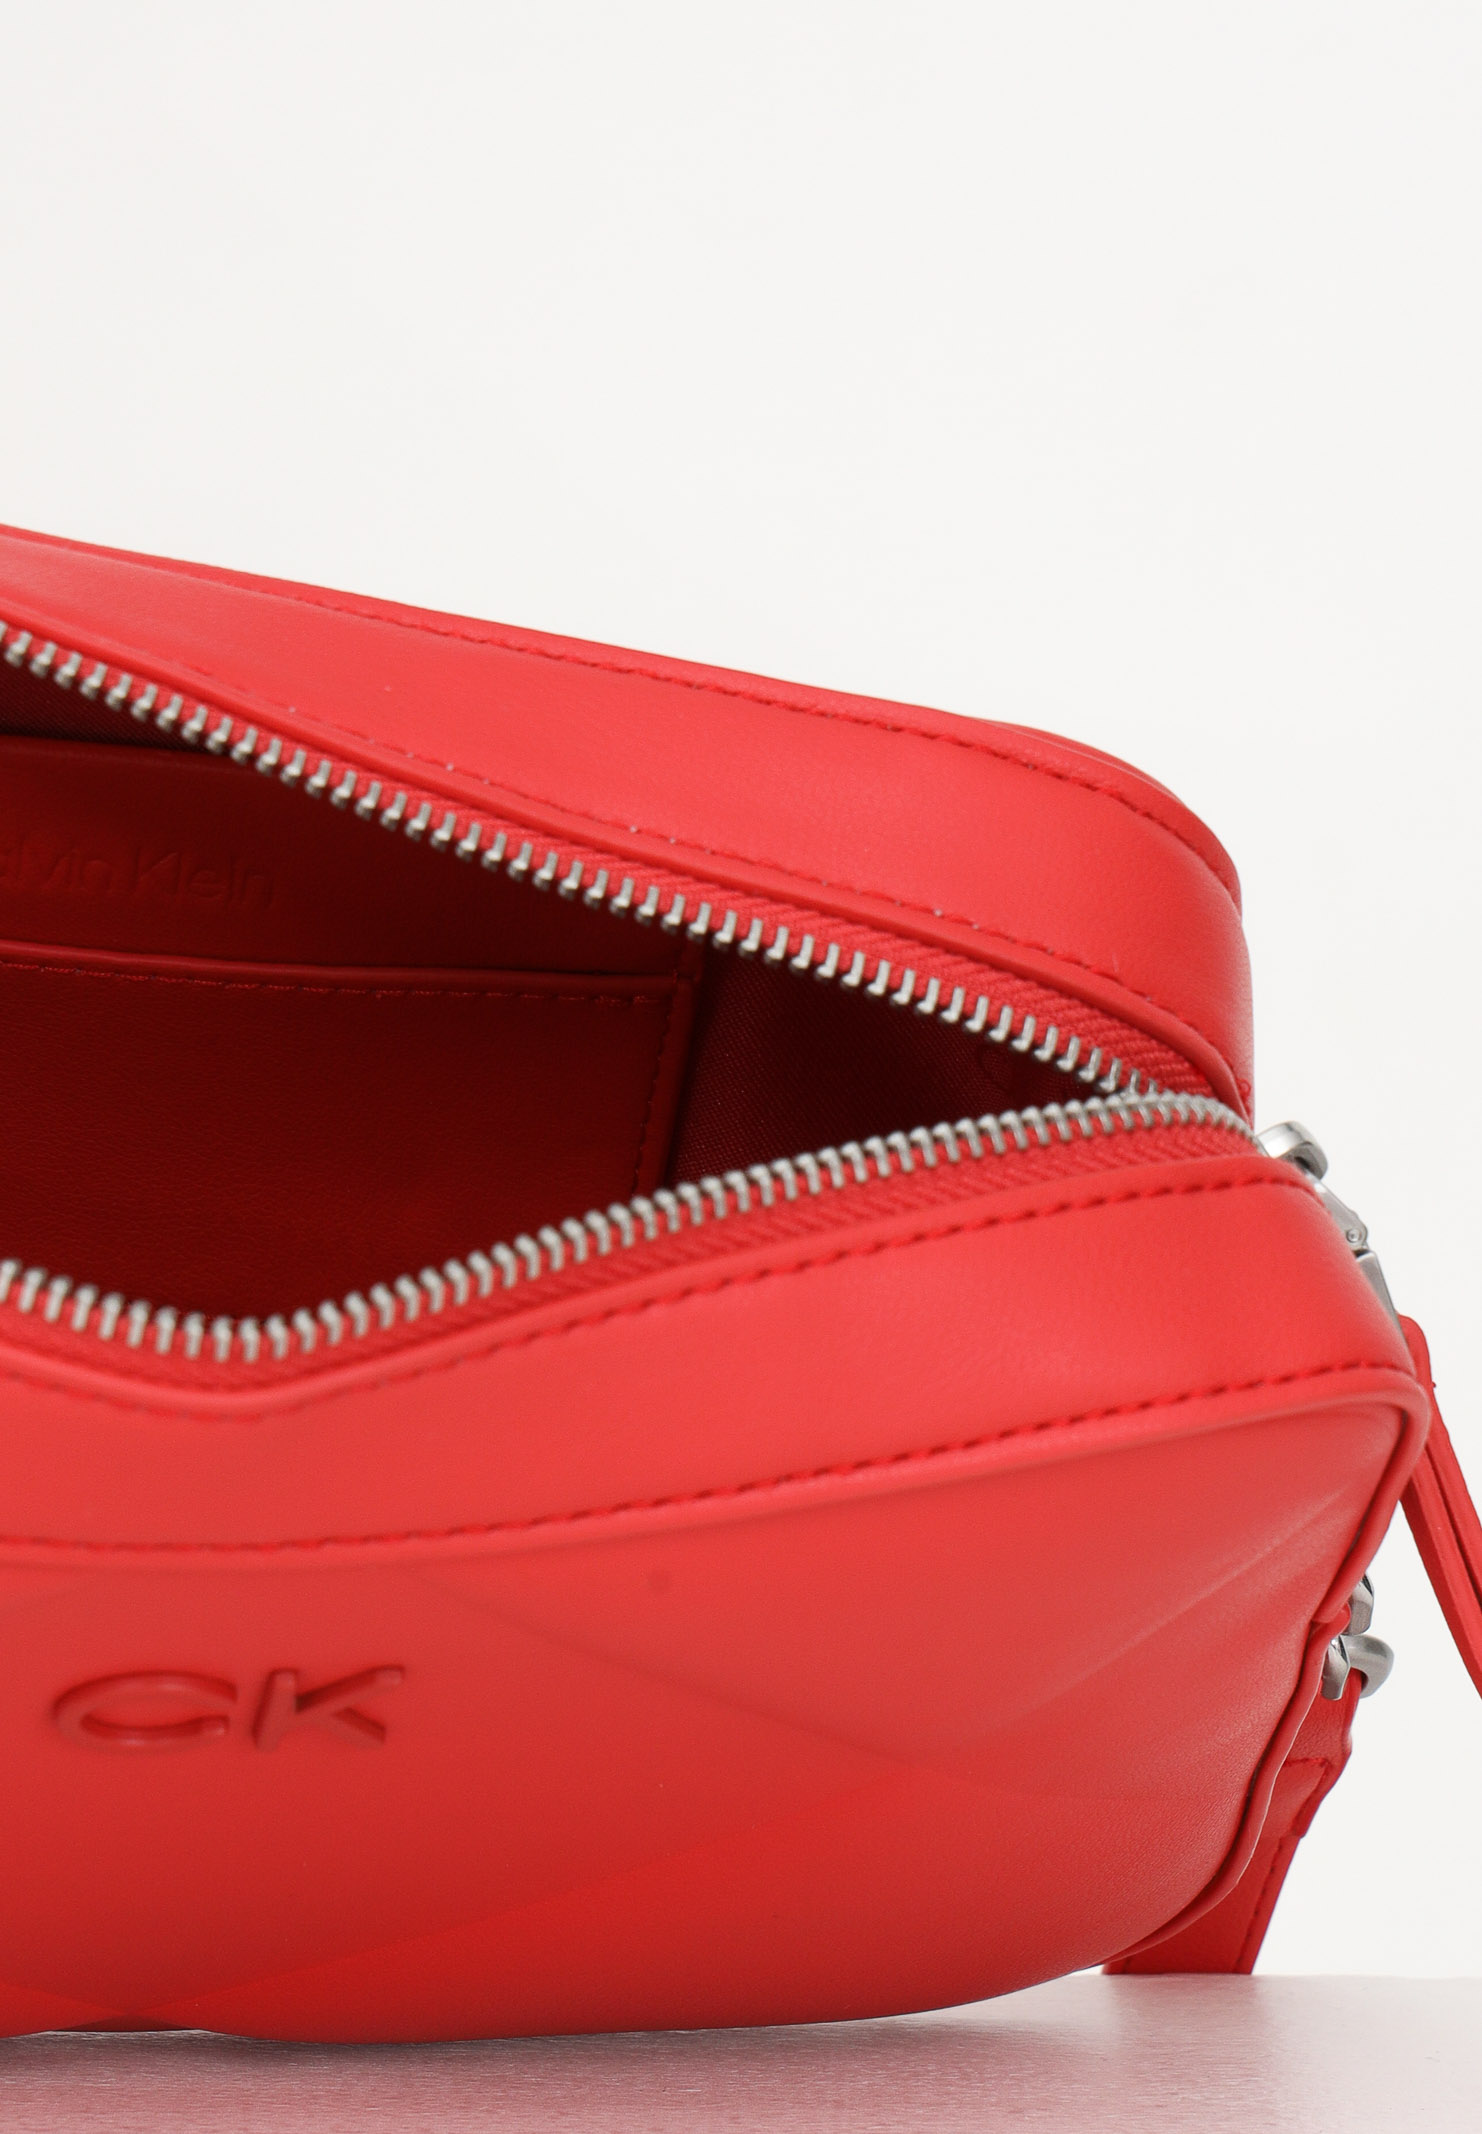 Red women's shoulder bag with quilted pattern - CALVIN KLEIN JEANS